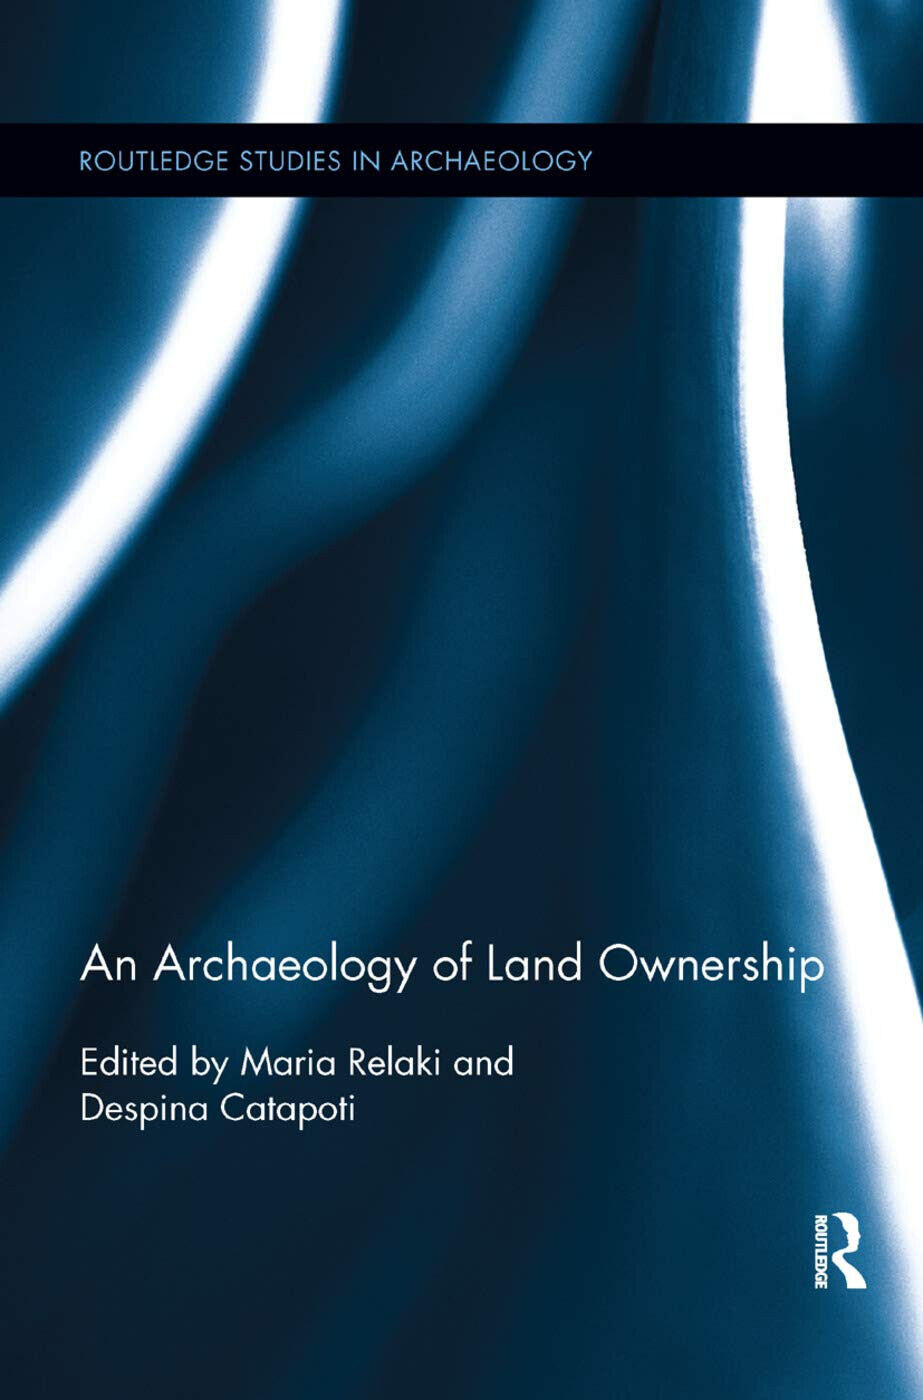 An Archaeology of Land Ownership - Maria Relaki - Routledge, 2018